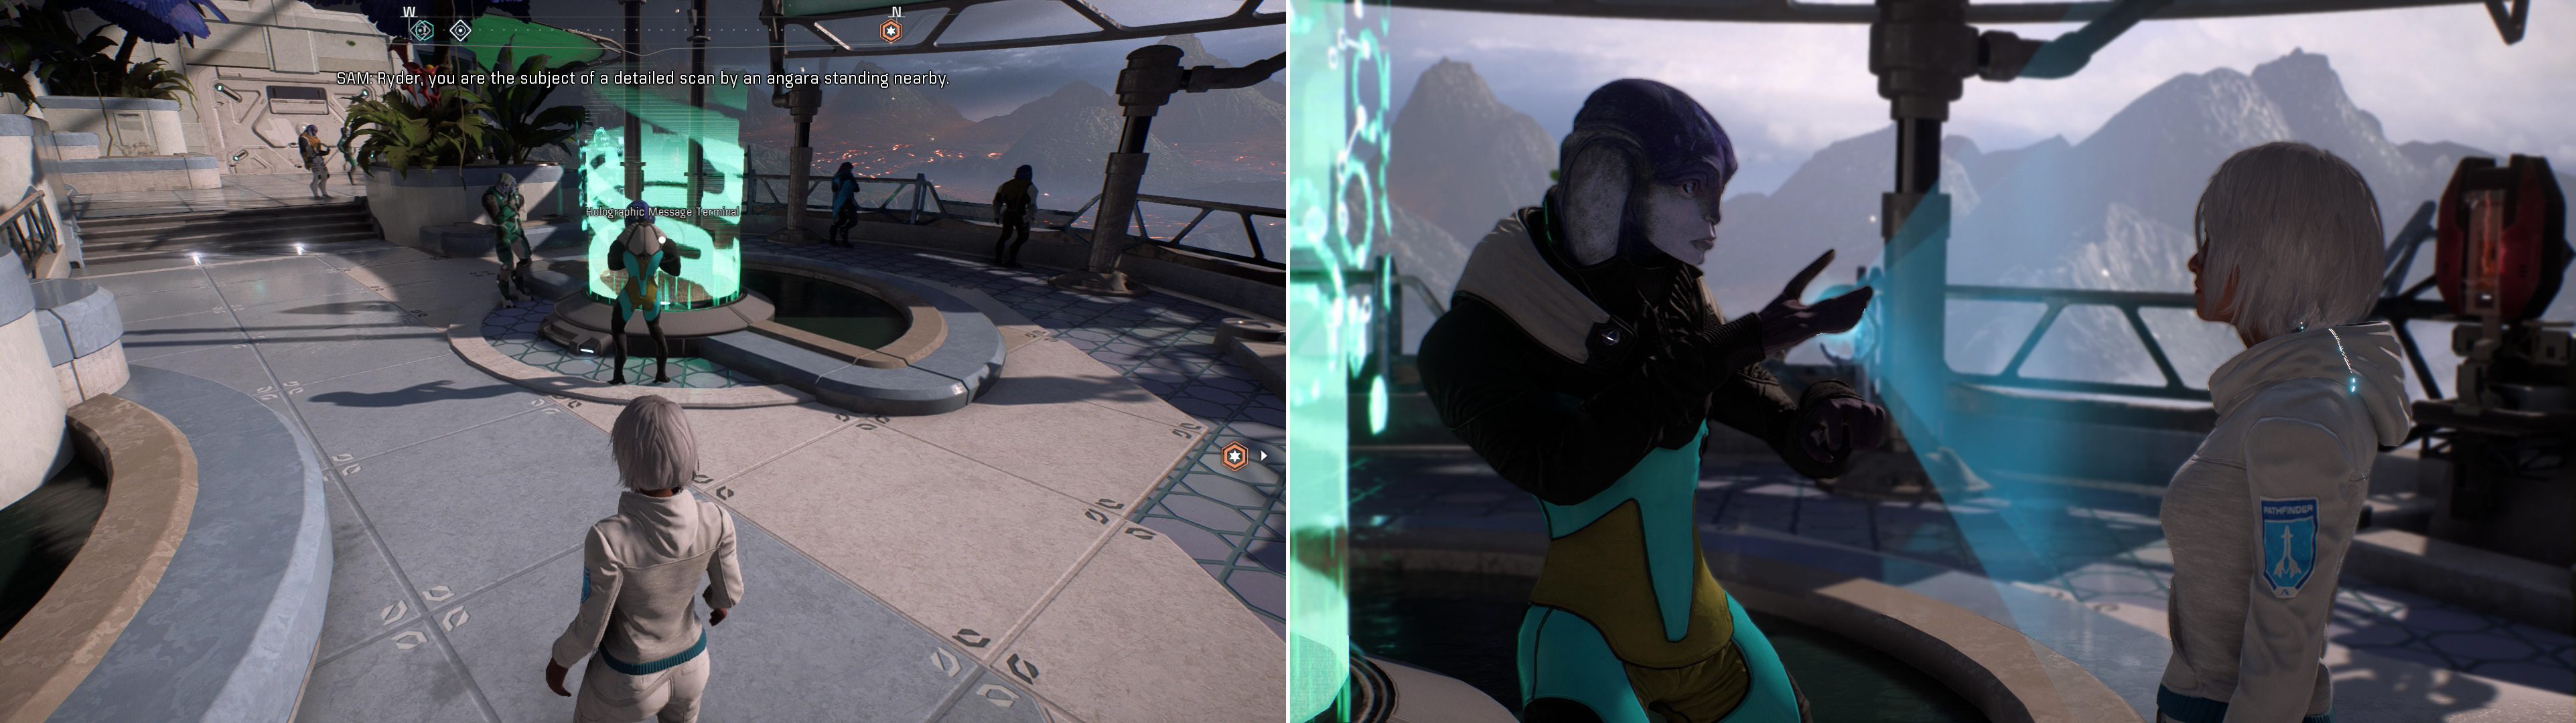 As you pass through Aya, you'll be warned of a voyeuristic scan by SAM (left). Confront the rude Angara and make an exchange of it, or just formally consent to the scanning (right).